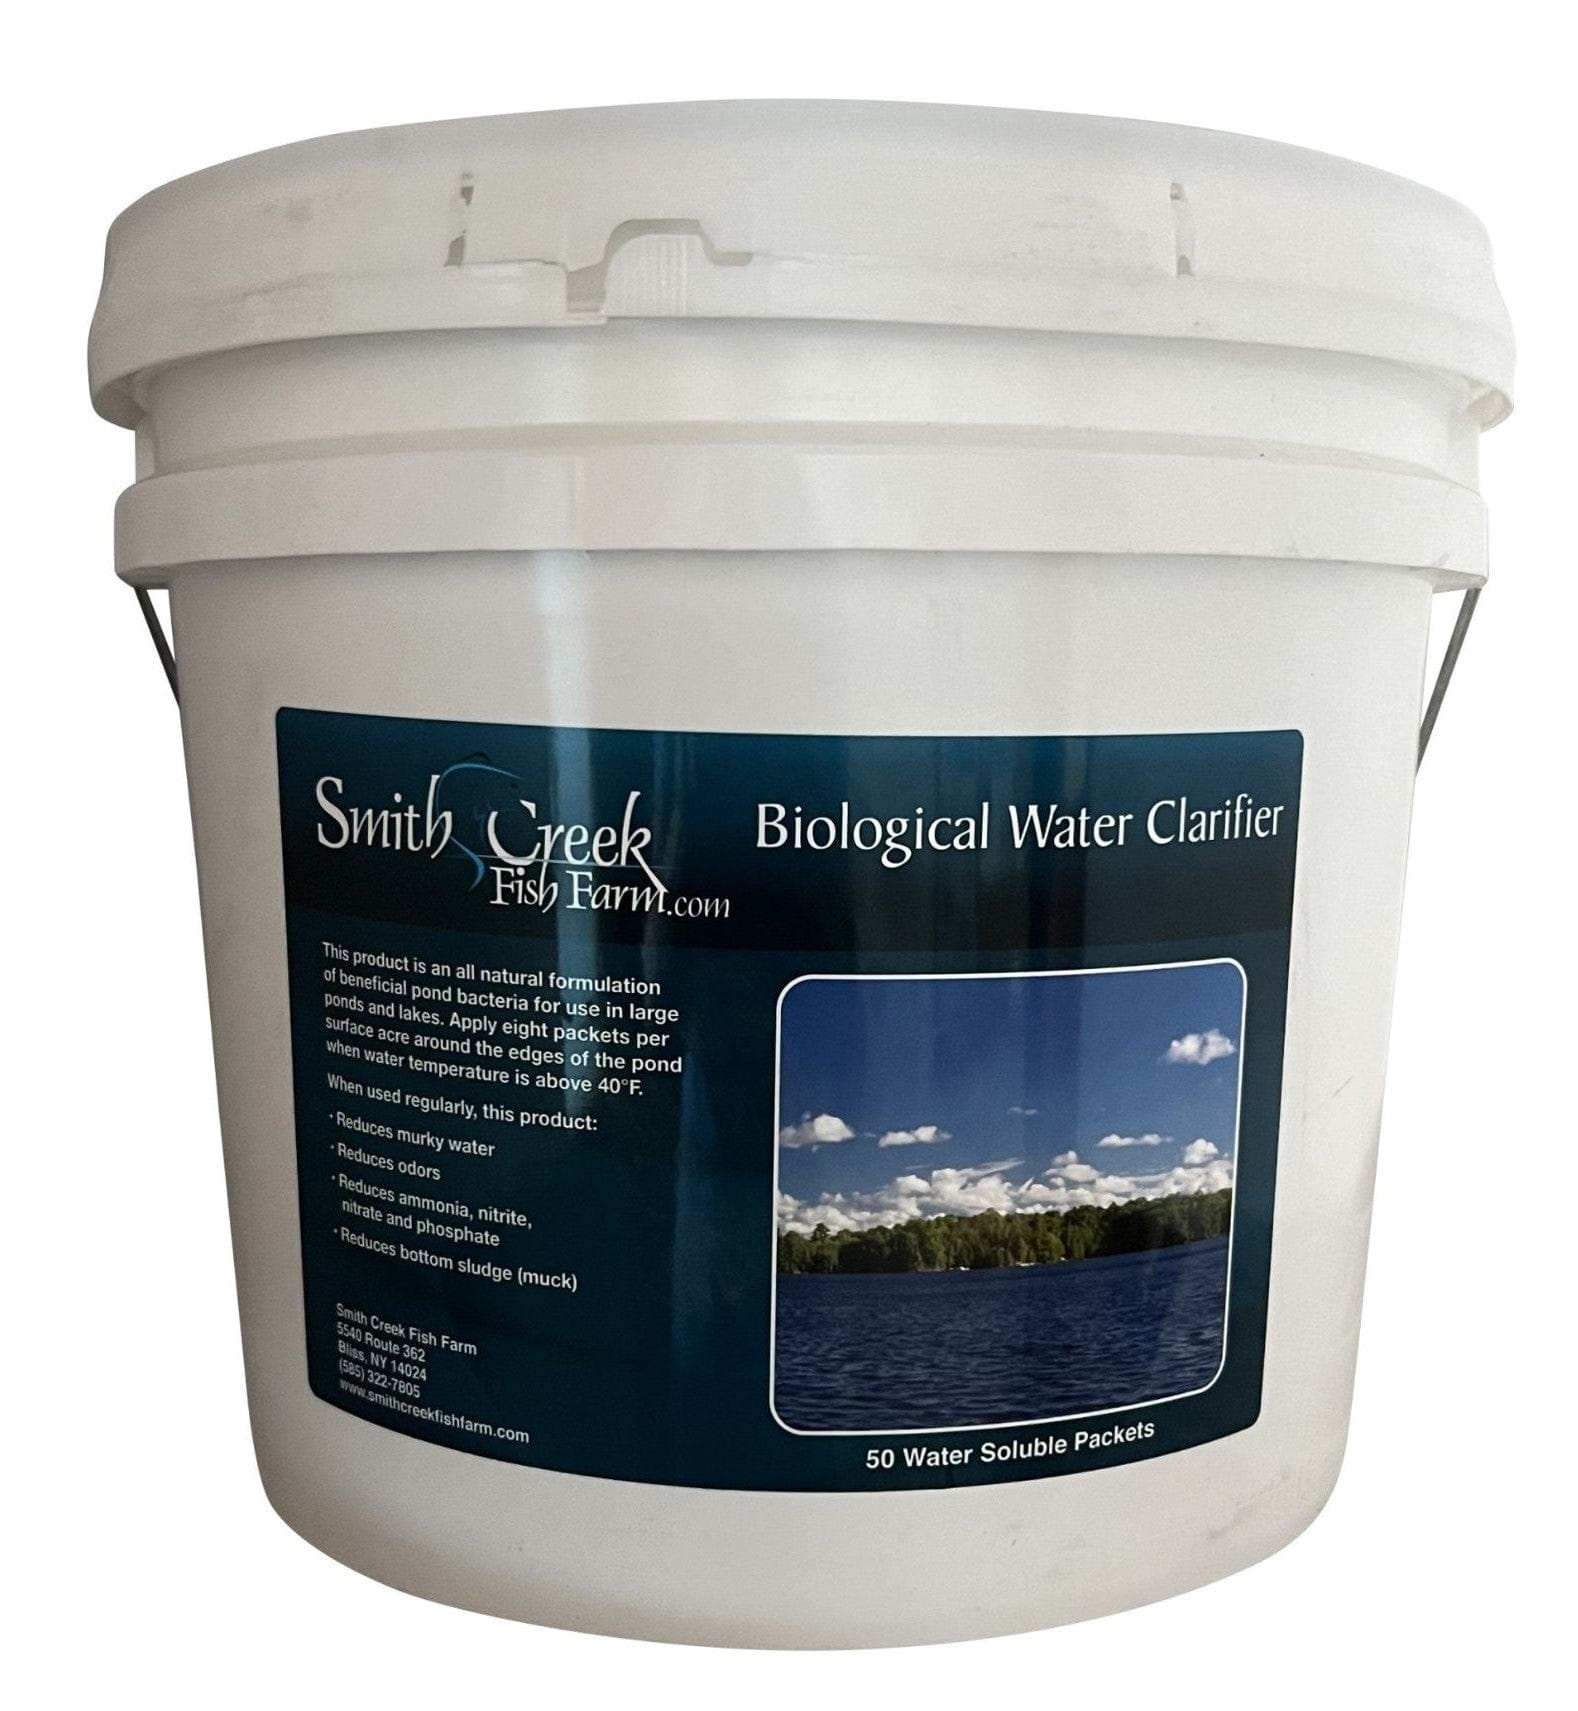 Smith Creek Lake & Pond Bacterial Pond Clear-Smith Creek Brand Beneficial Farm Pond Bacteria | Pond Clear | Improve Water Clarity